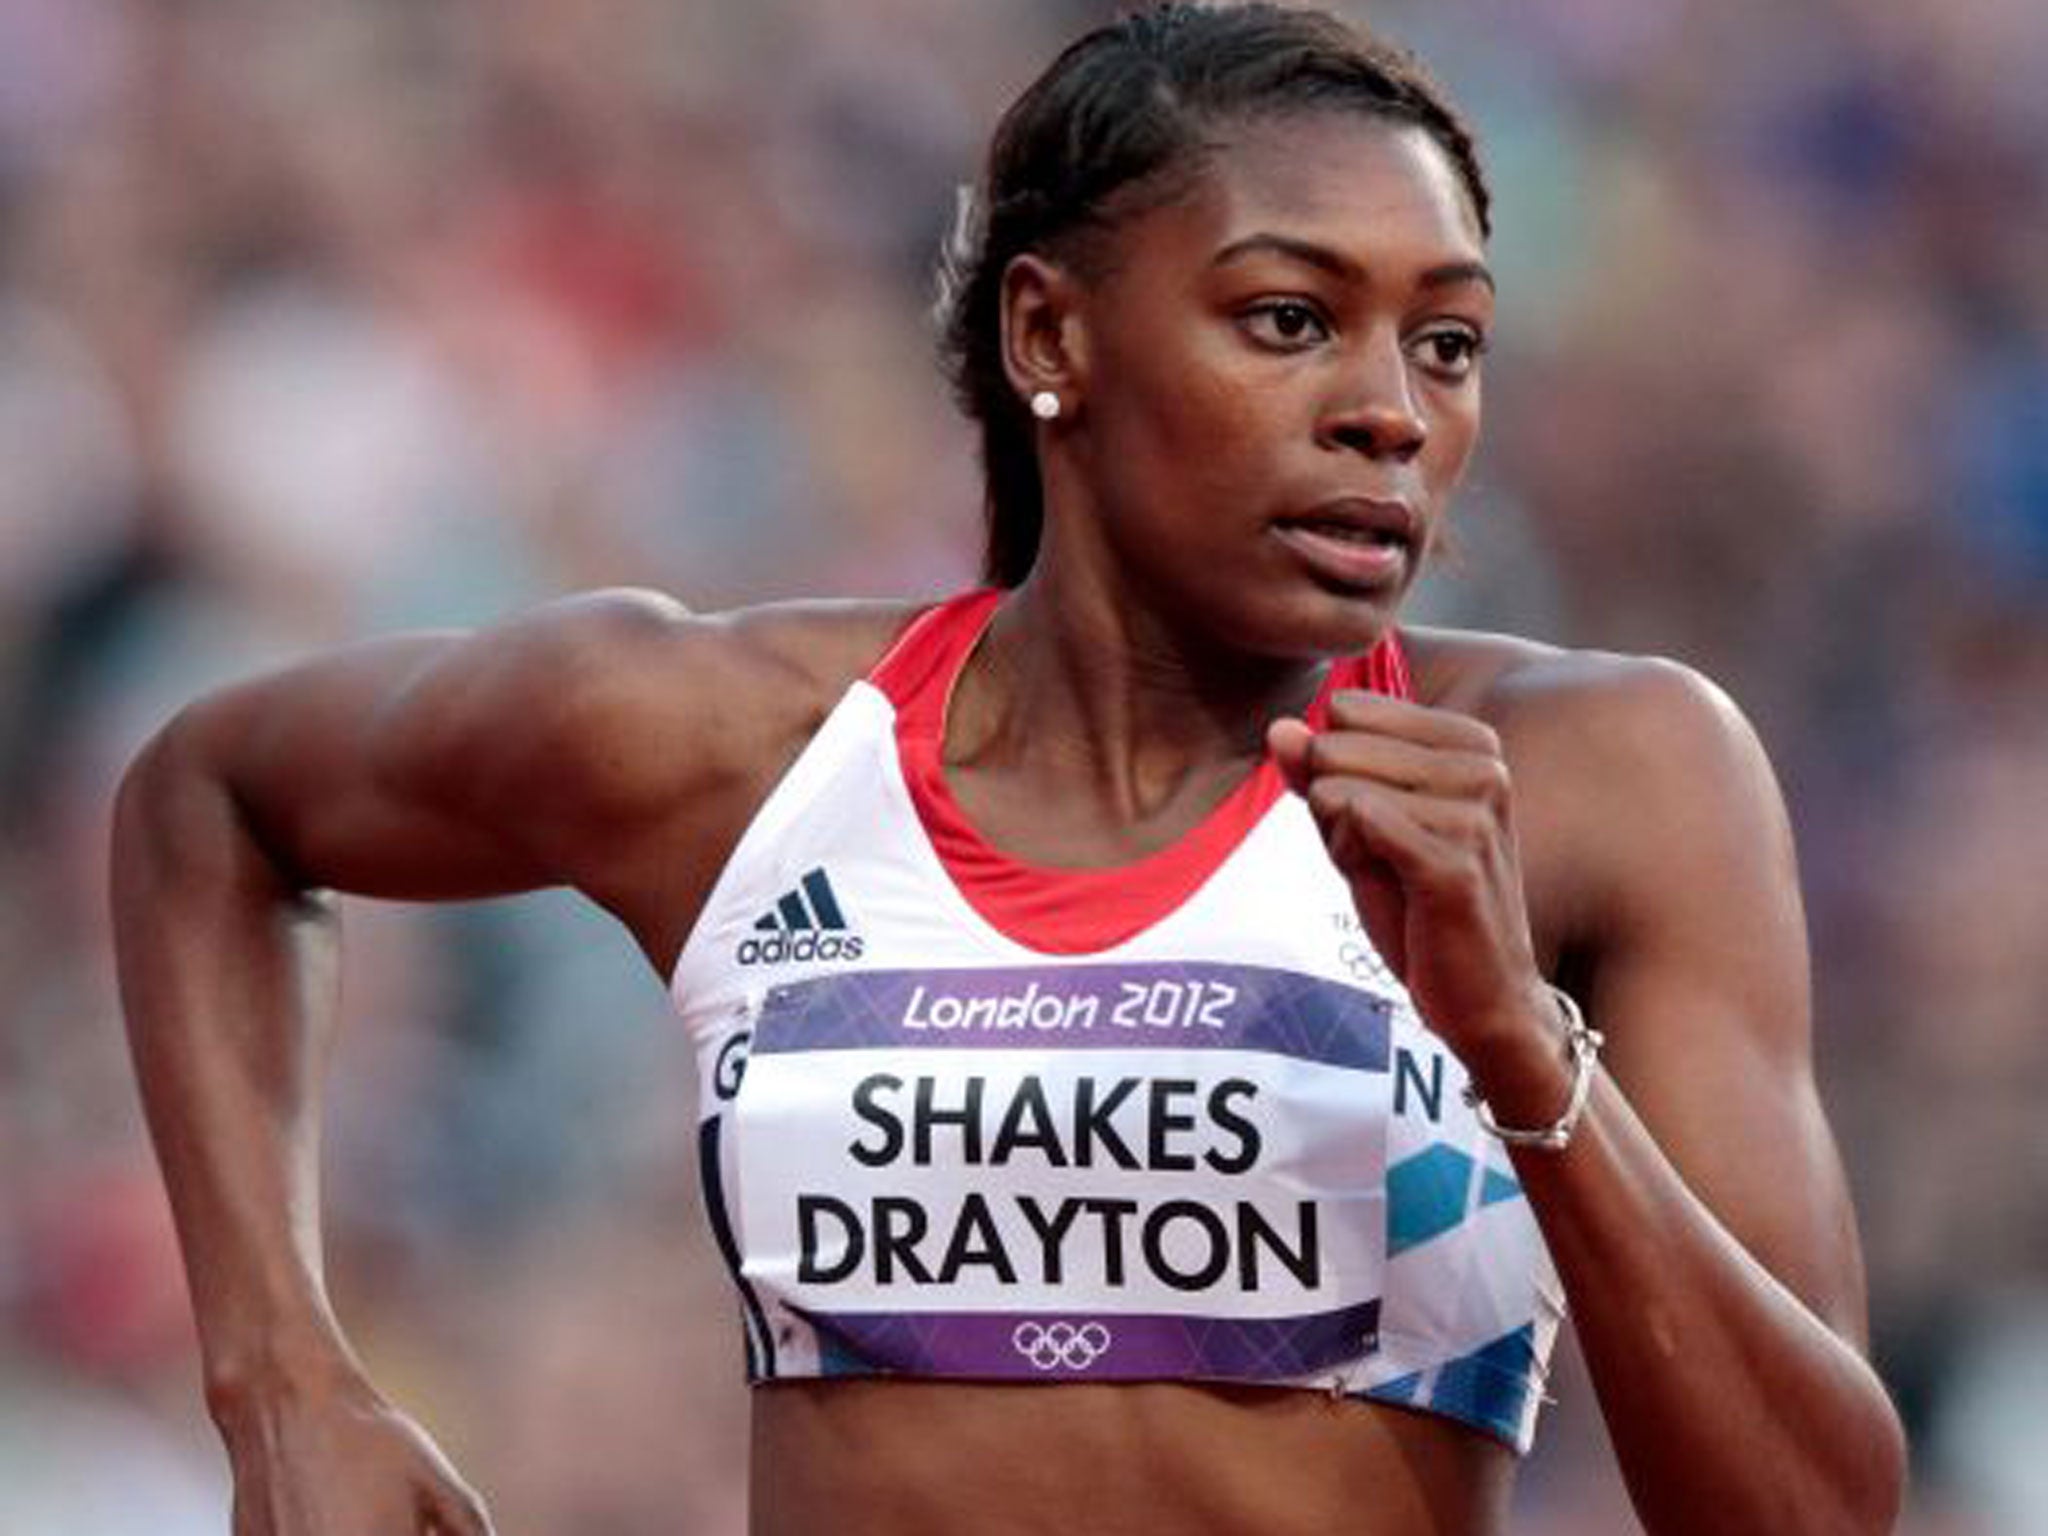 Perri Shakes-Drayton, 400m: The 400m hurdler is in great shape on the flat.